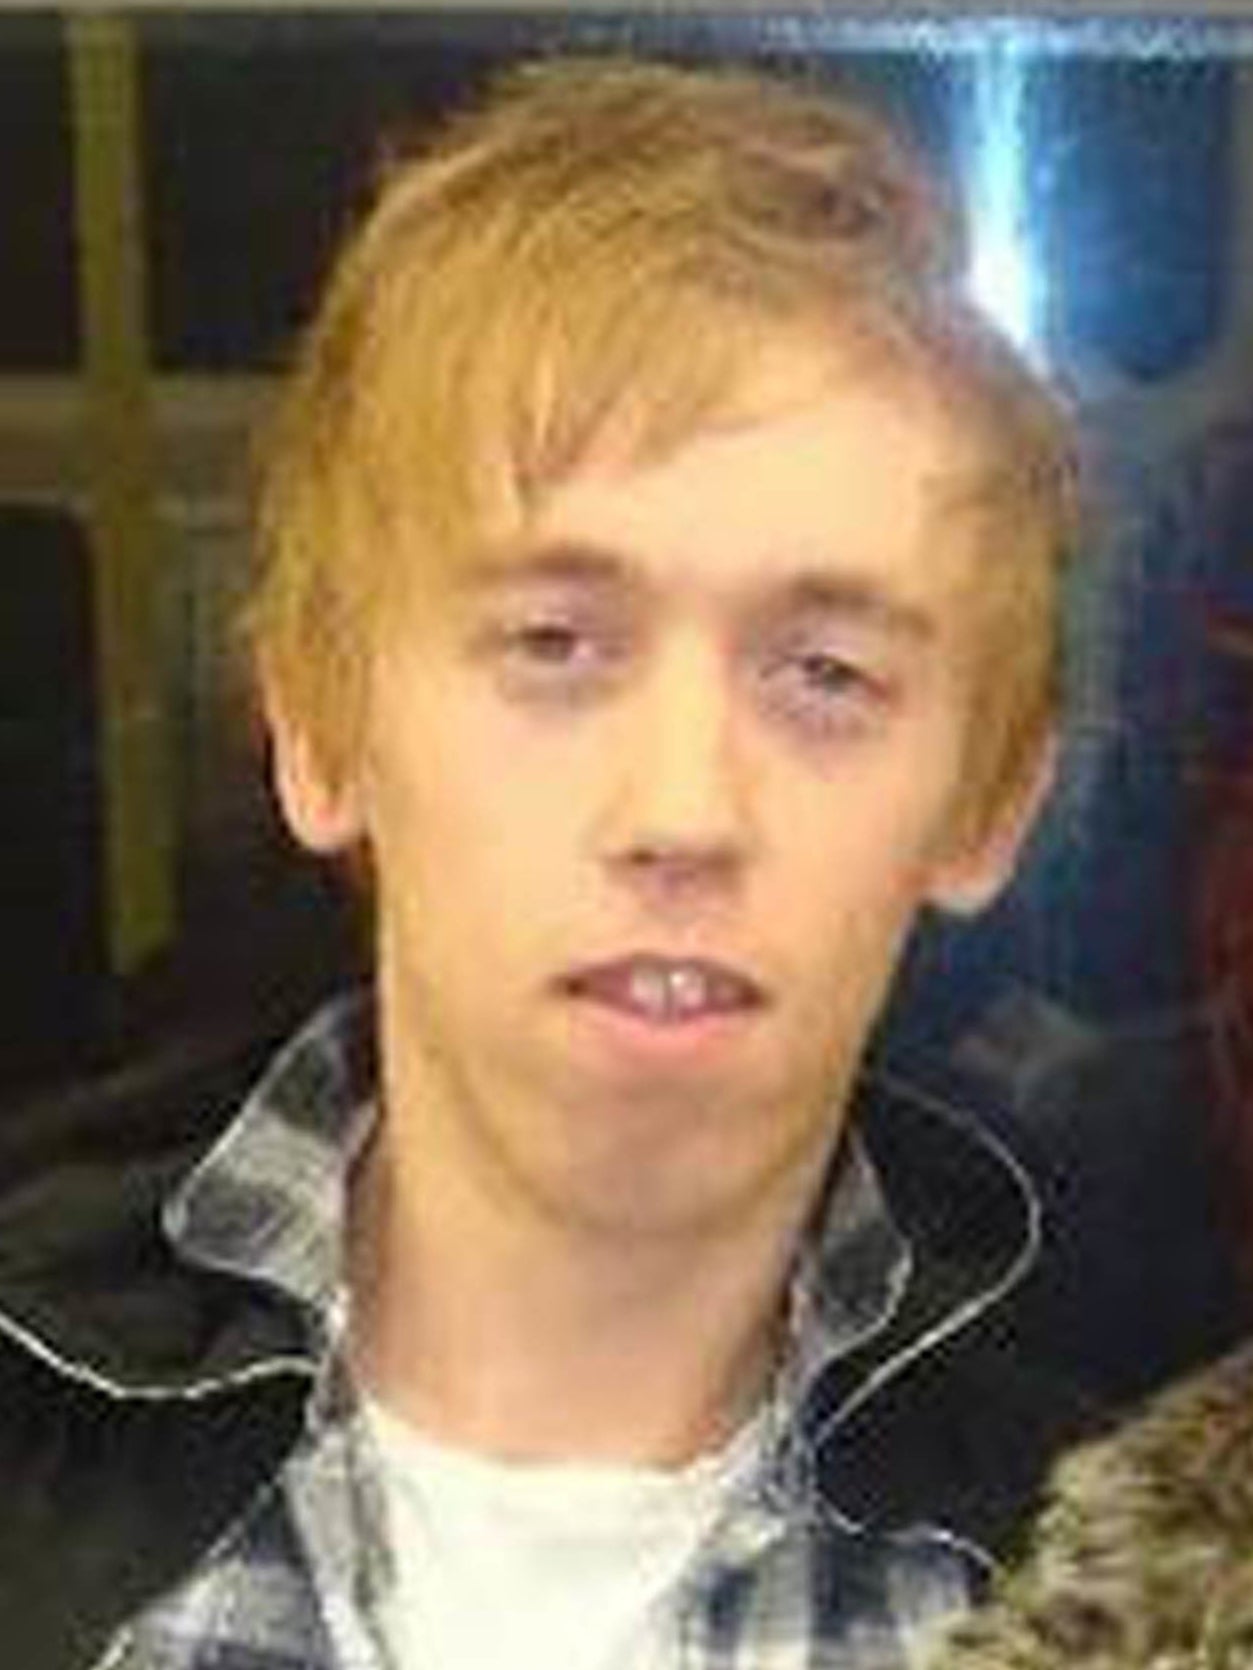 Fashion student Anthony Walgate, 23, was Stephen Port’s first victim in June 2014